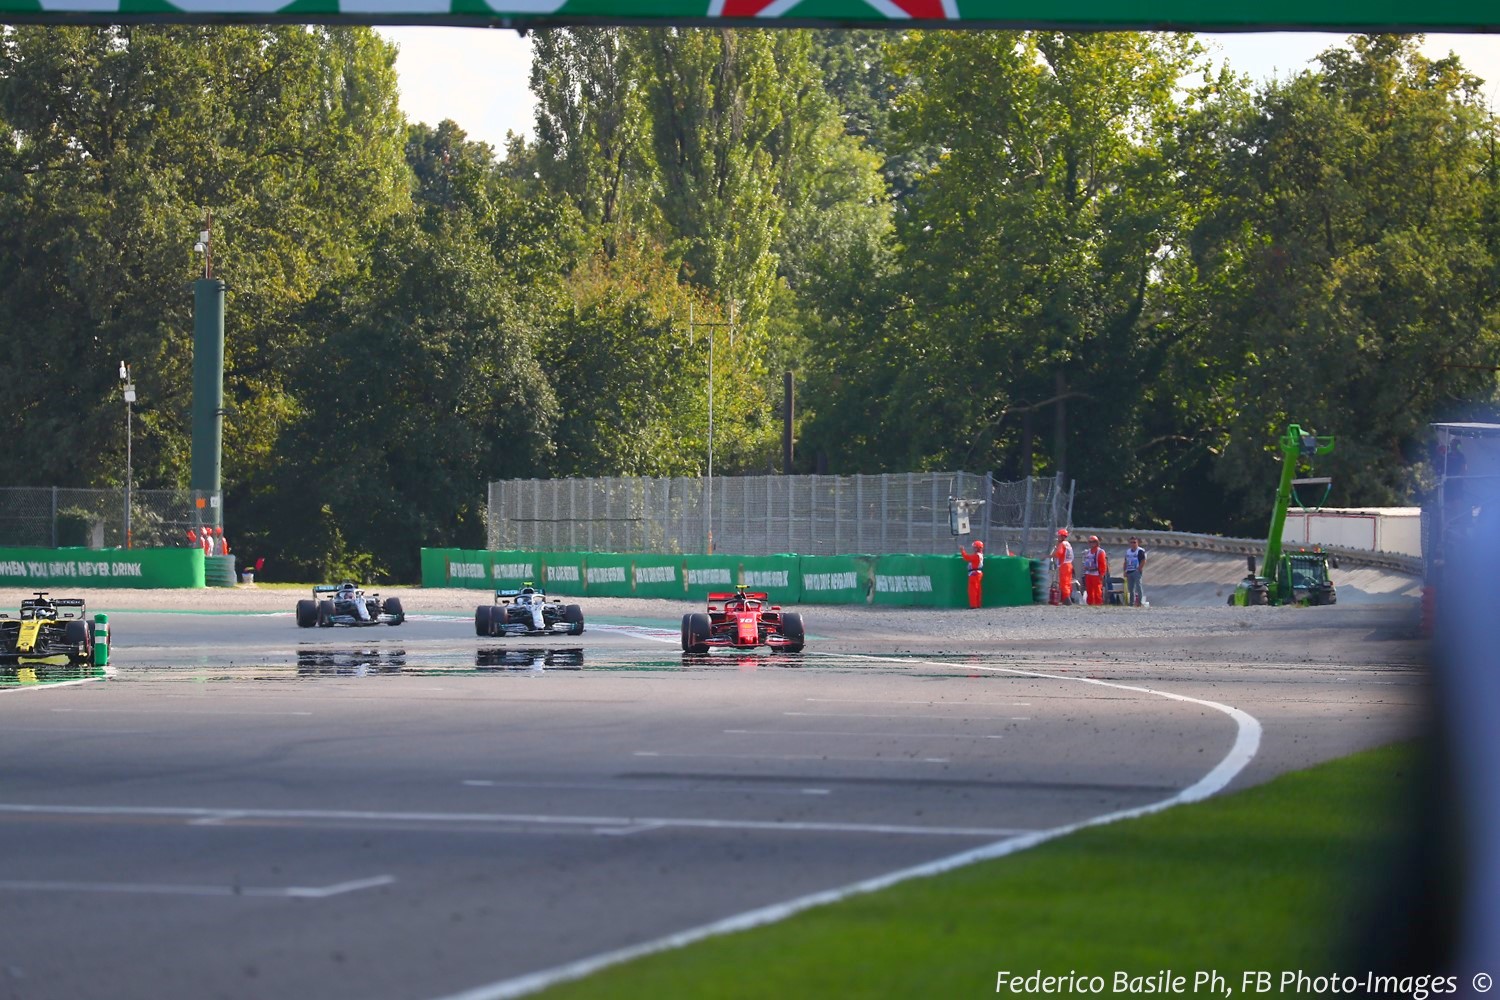 F1 cars exit the Parabolica and its expansive asphalt runoff area